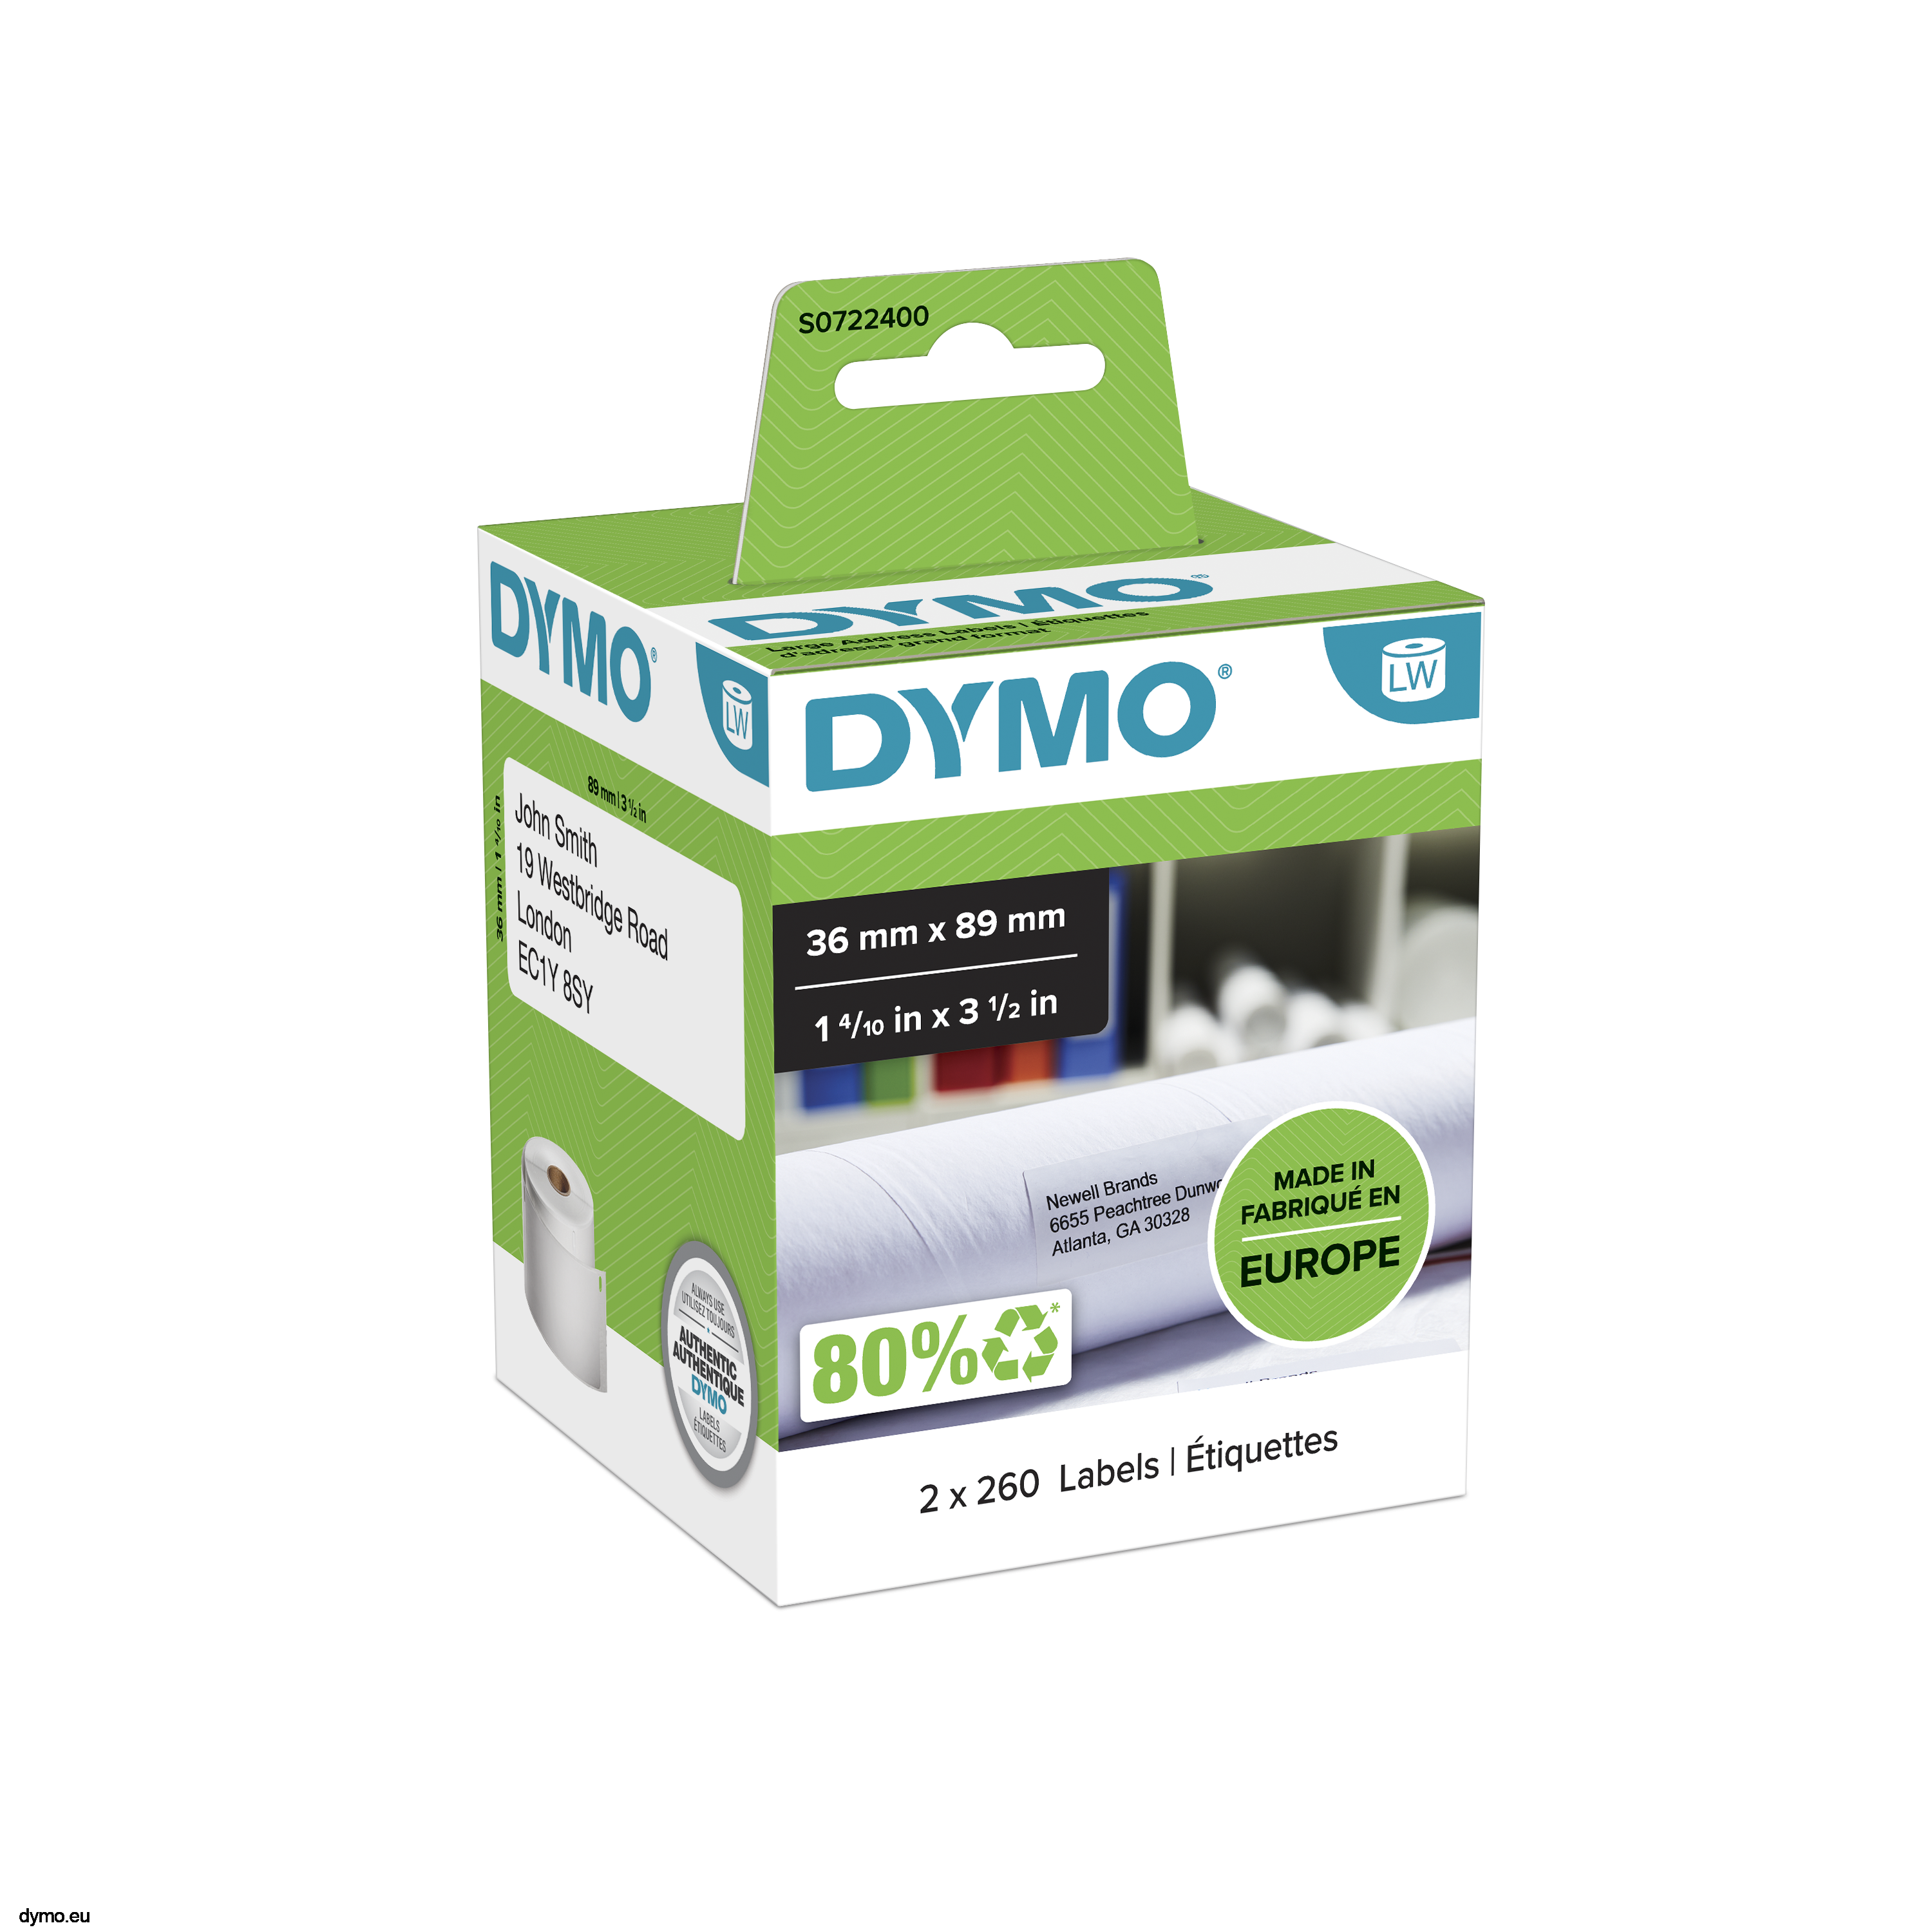 Details about   100x Rolls of 99012 Large Address/Shipping label 36mmx89mm for Dymo LabelWriter 